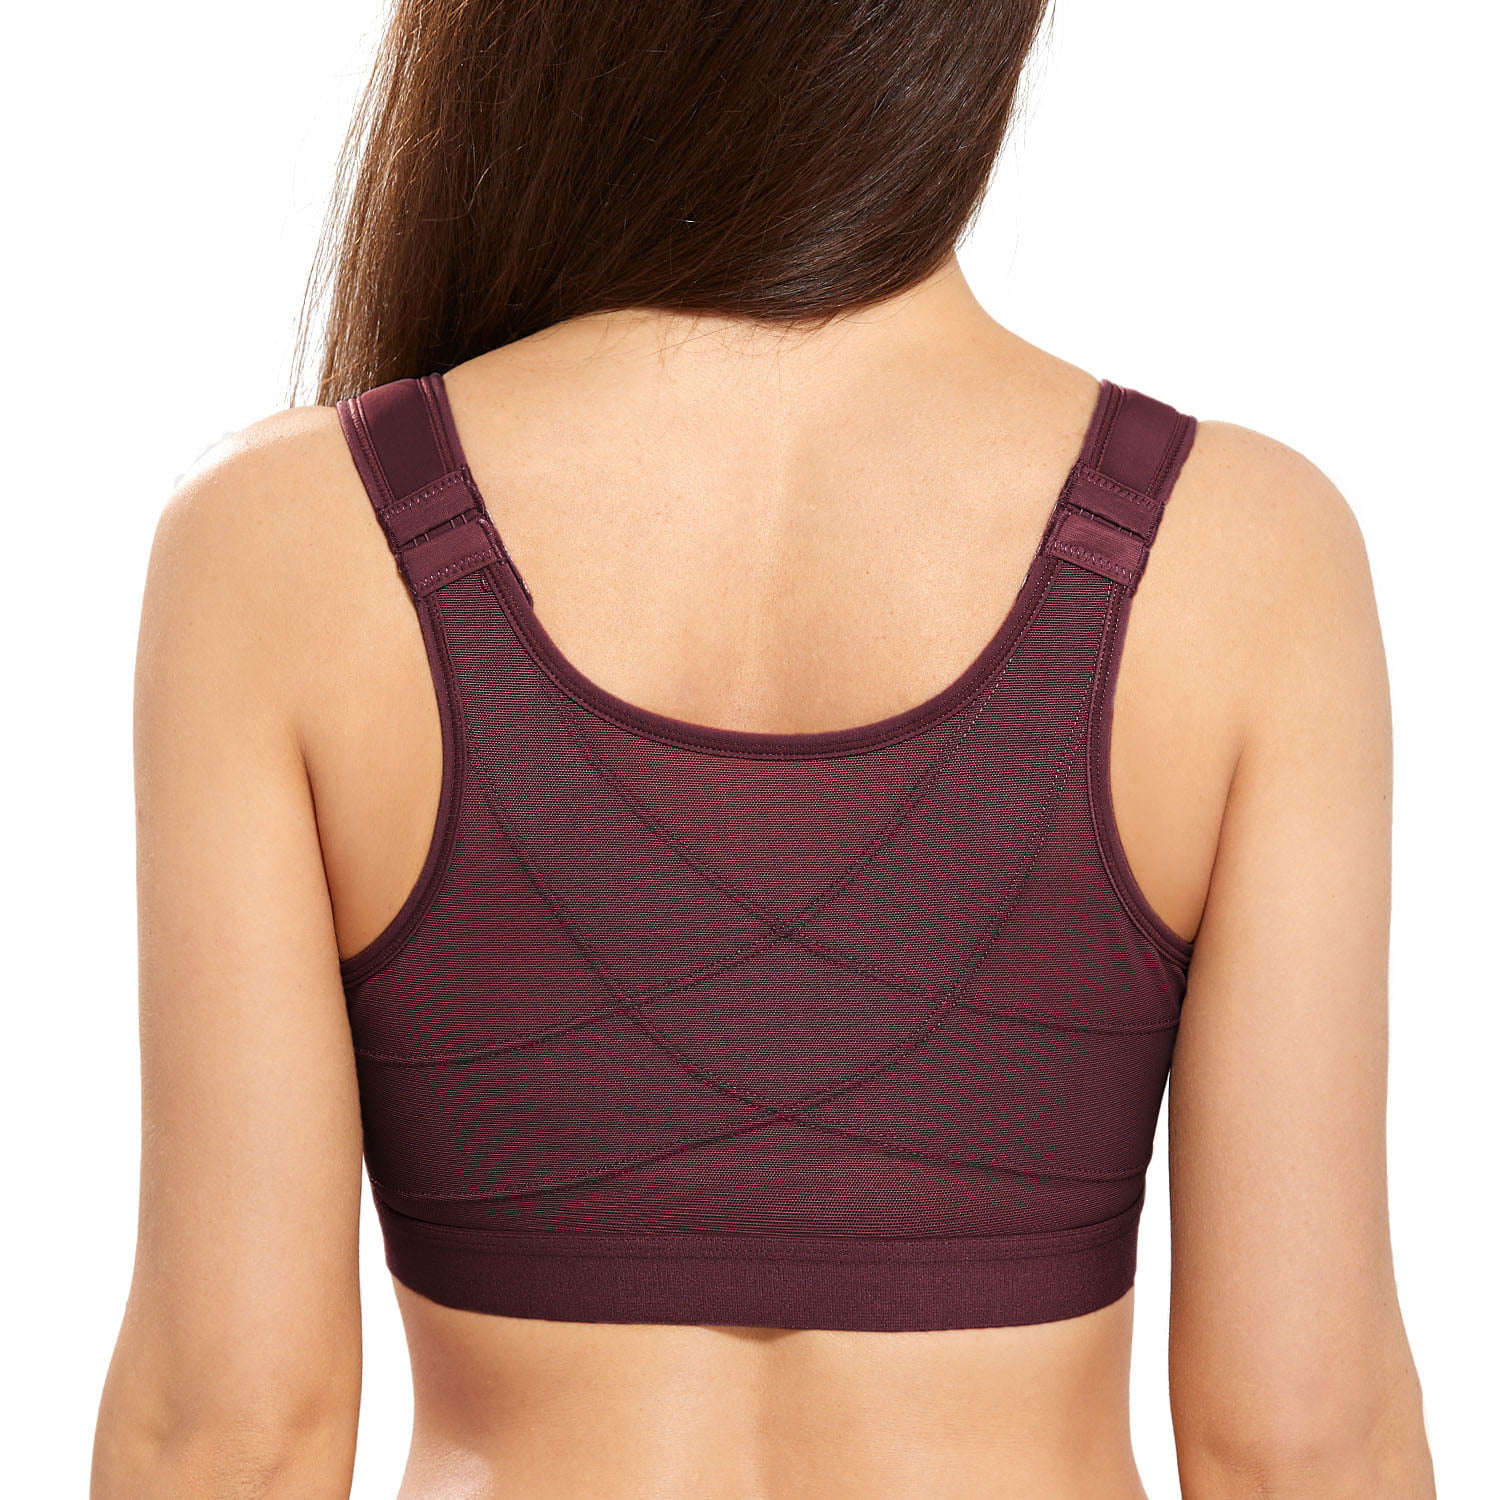 Exclare Front Closure Bra Back Support Full Coverage Non Padded